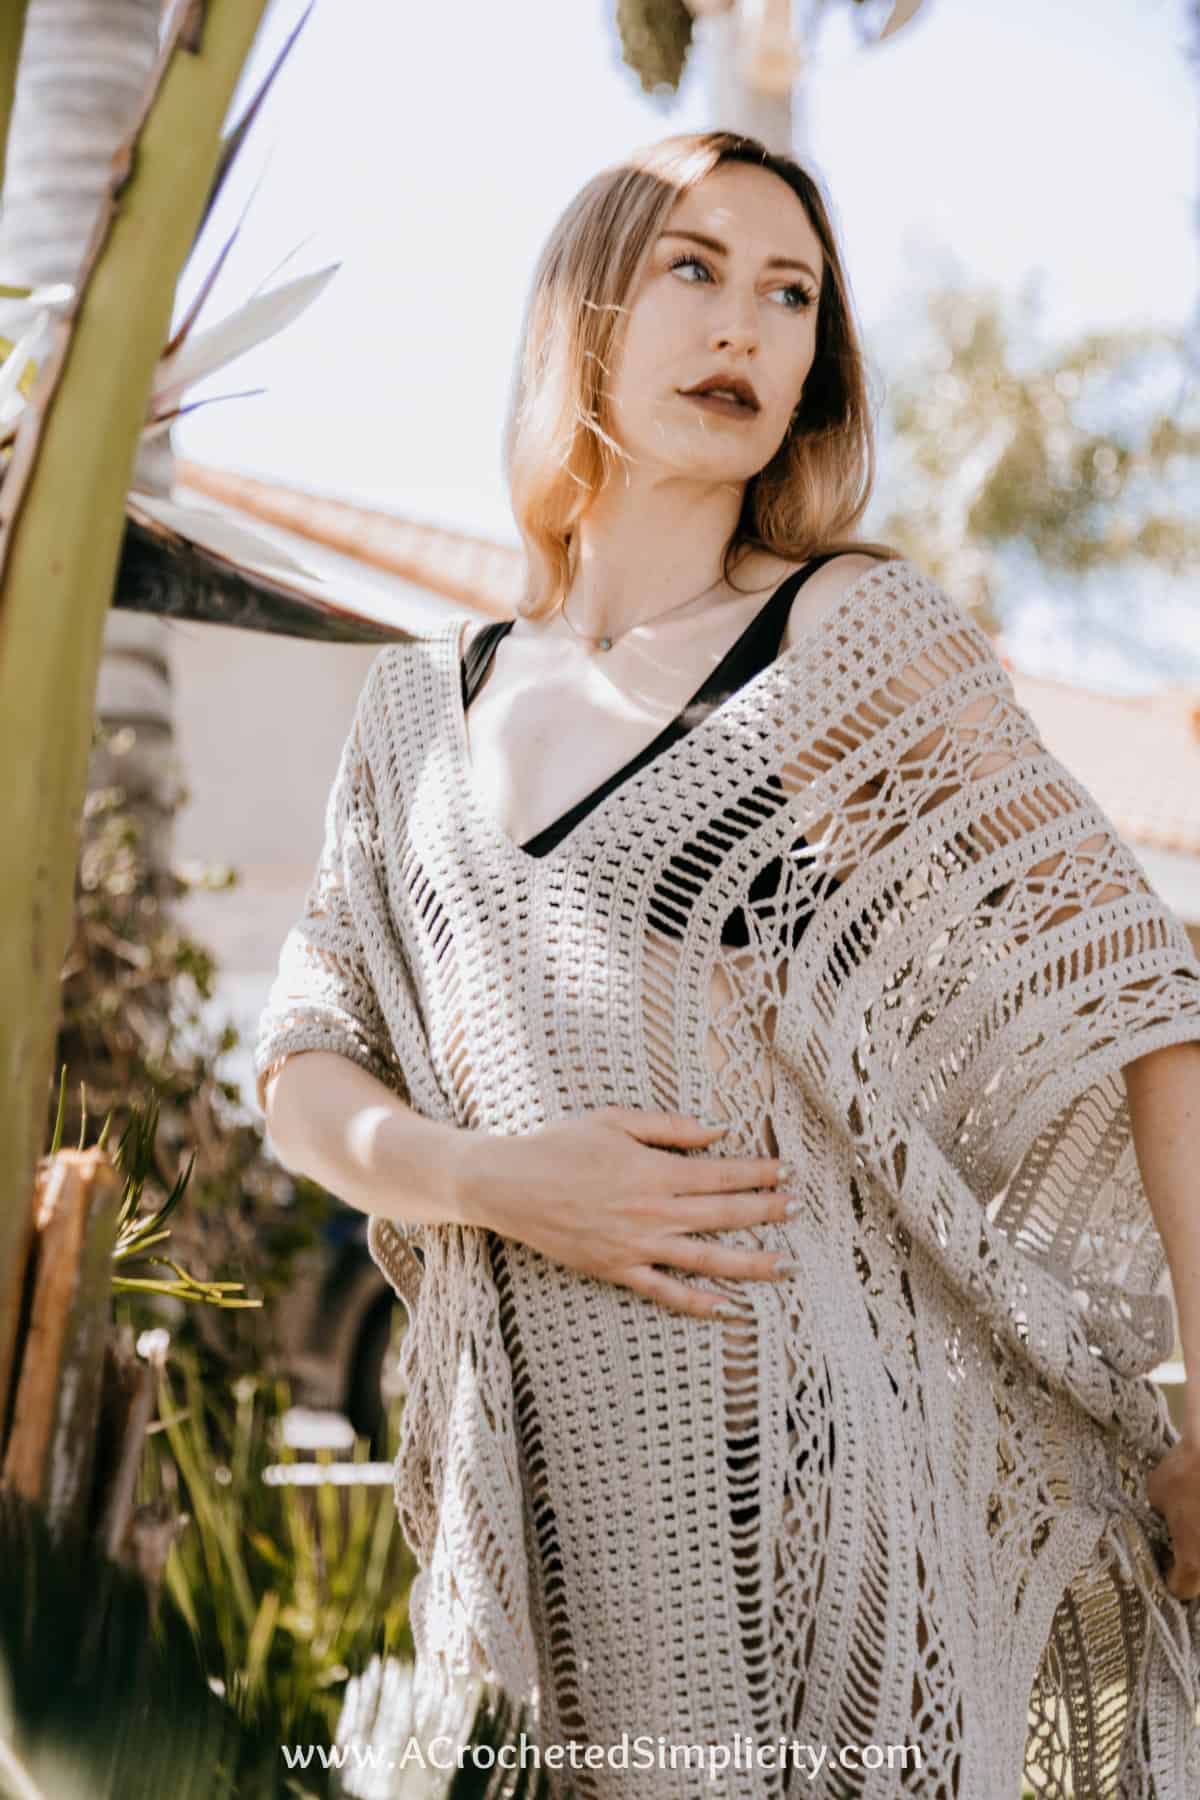 adult woman modeling crochet cover up